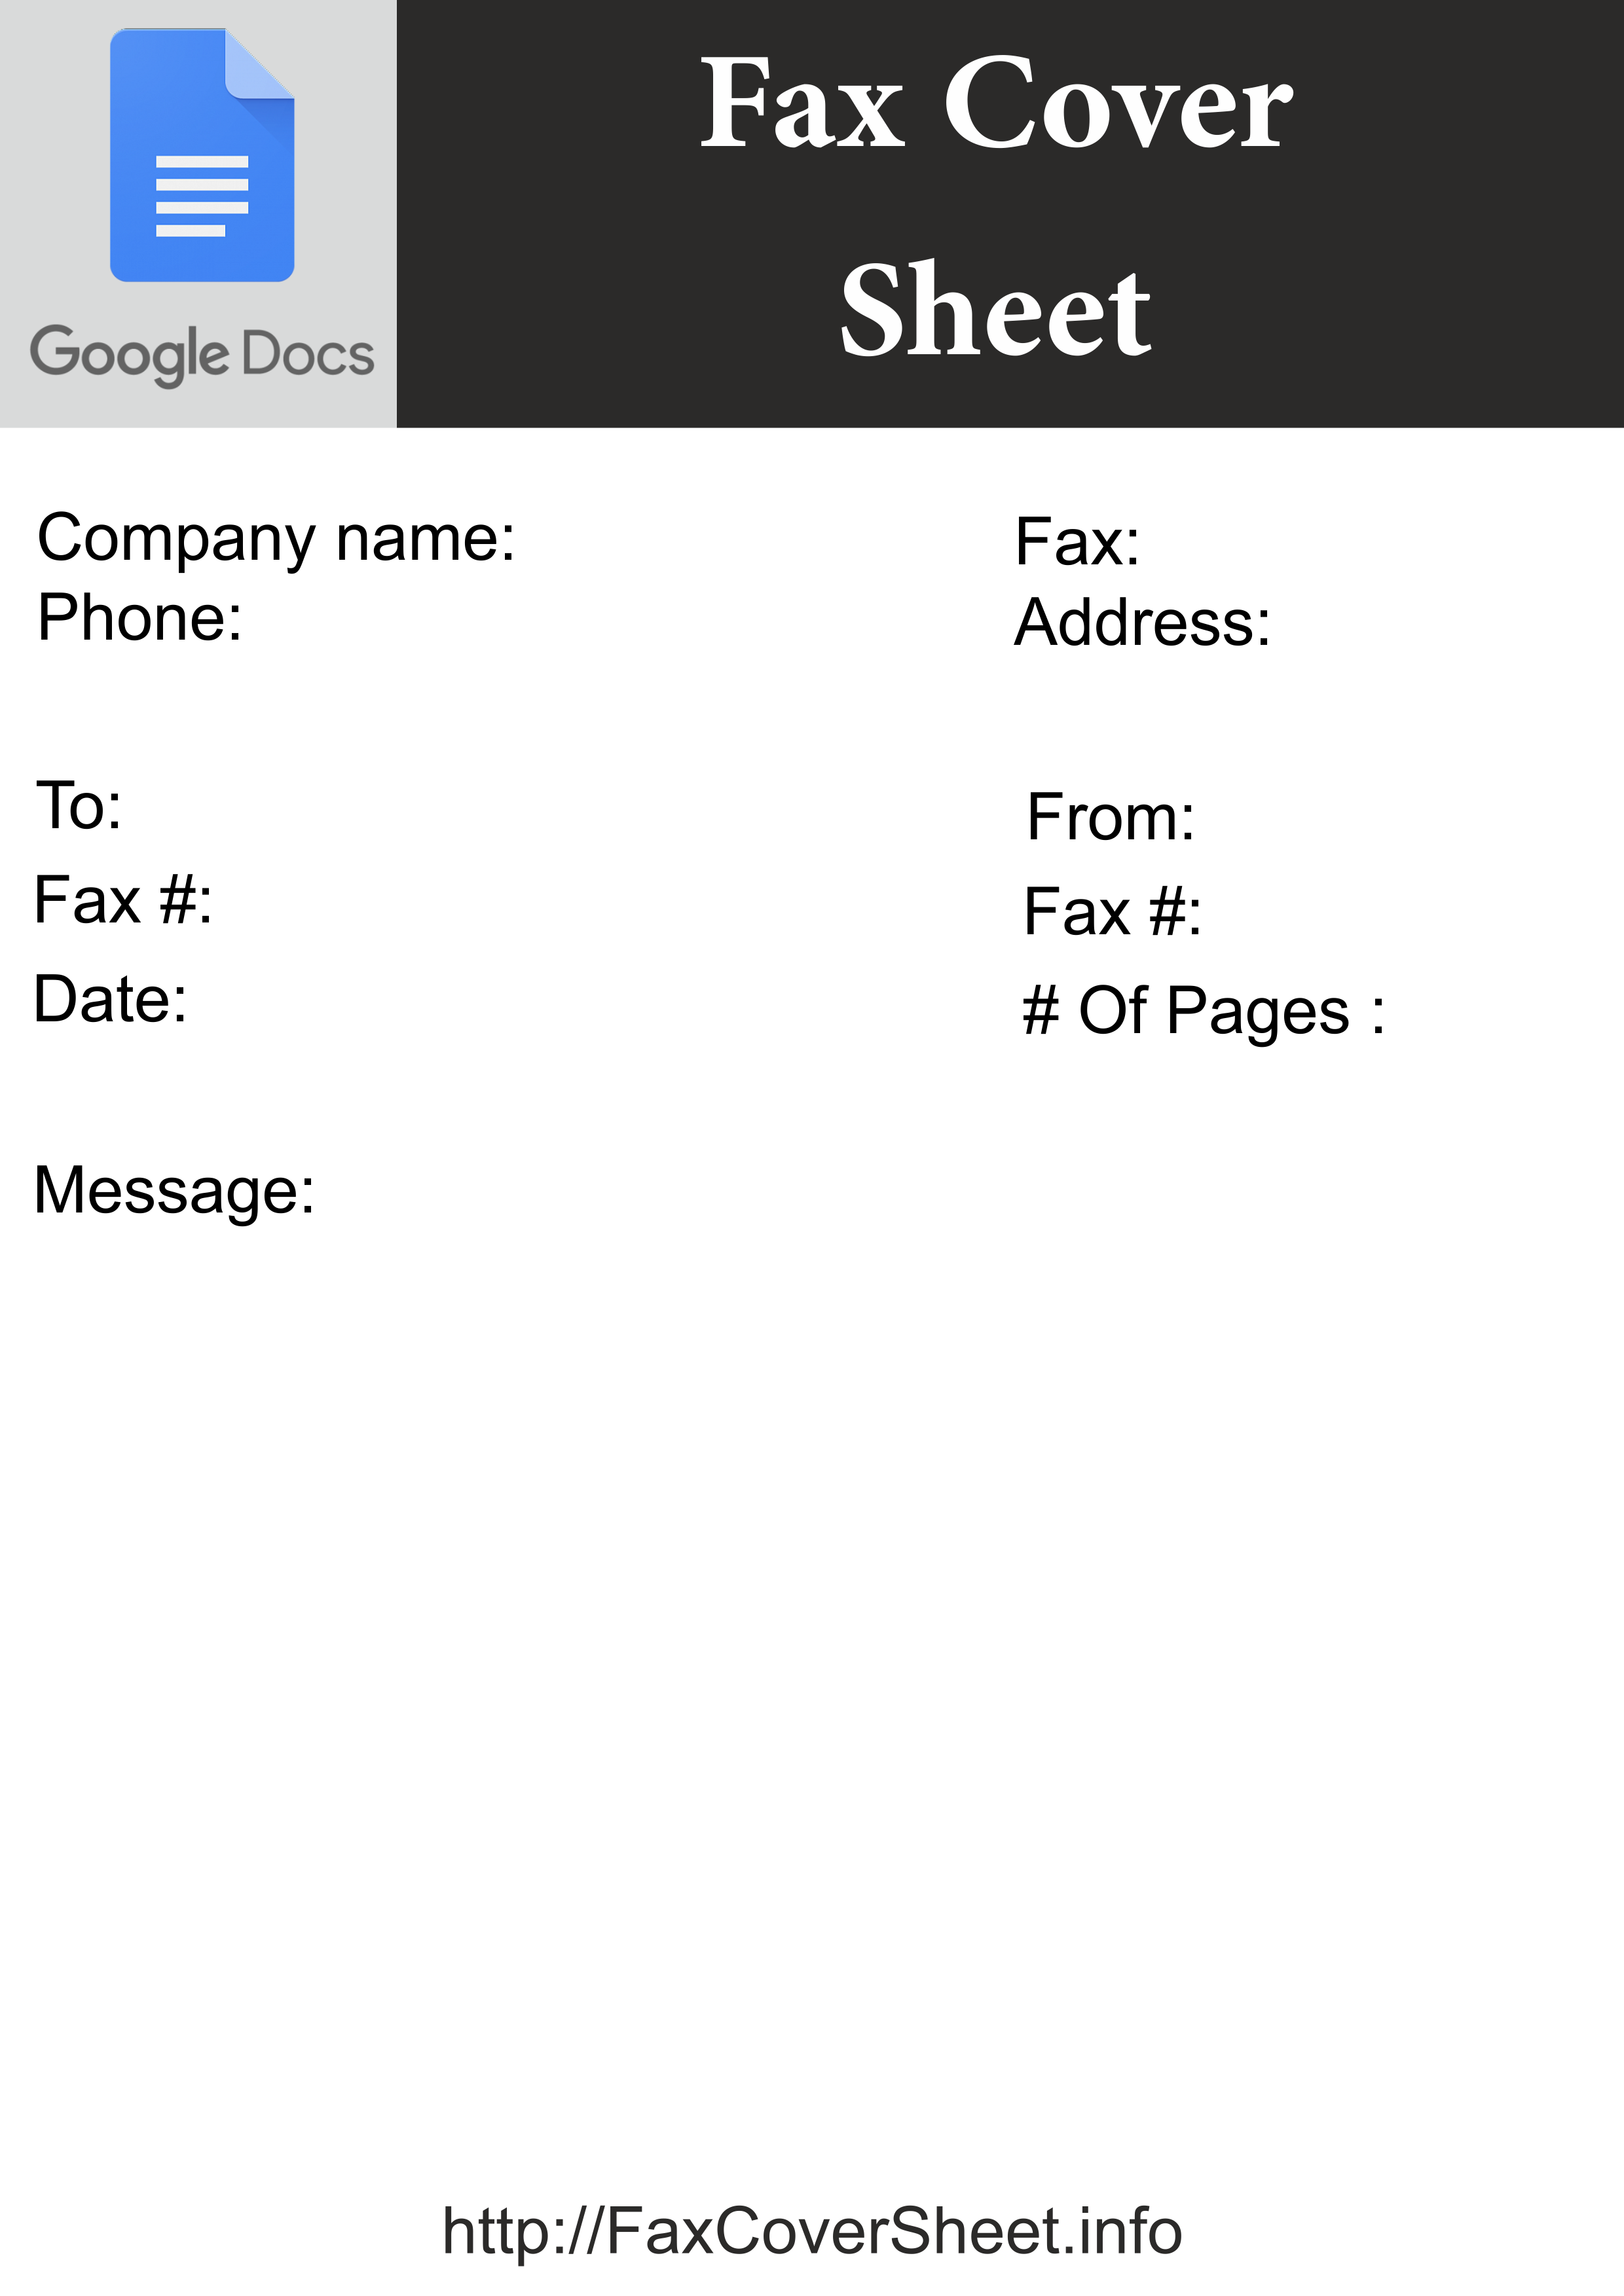 ready-to-use-google-docs-fax-cover-sheet-free-fax-cover-sheet